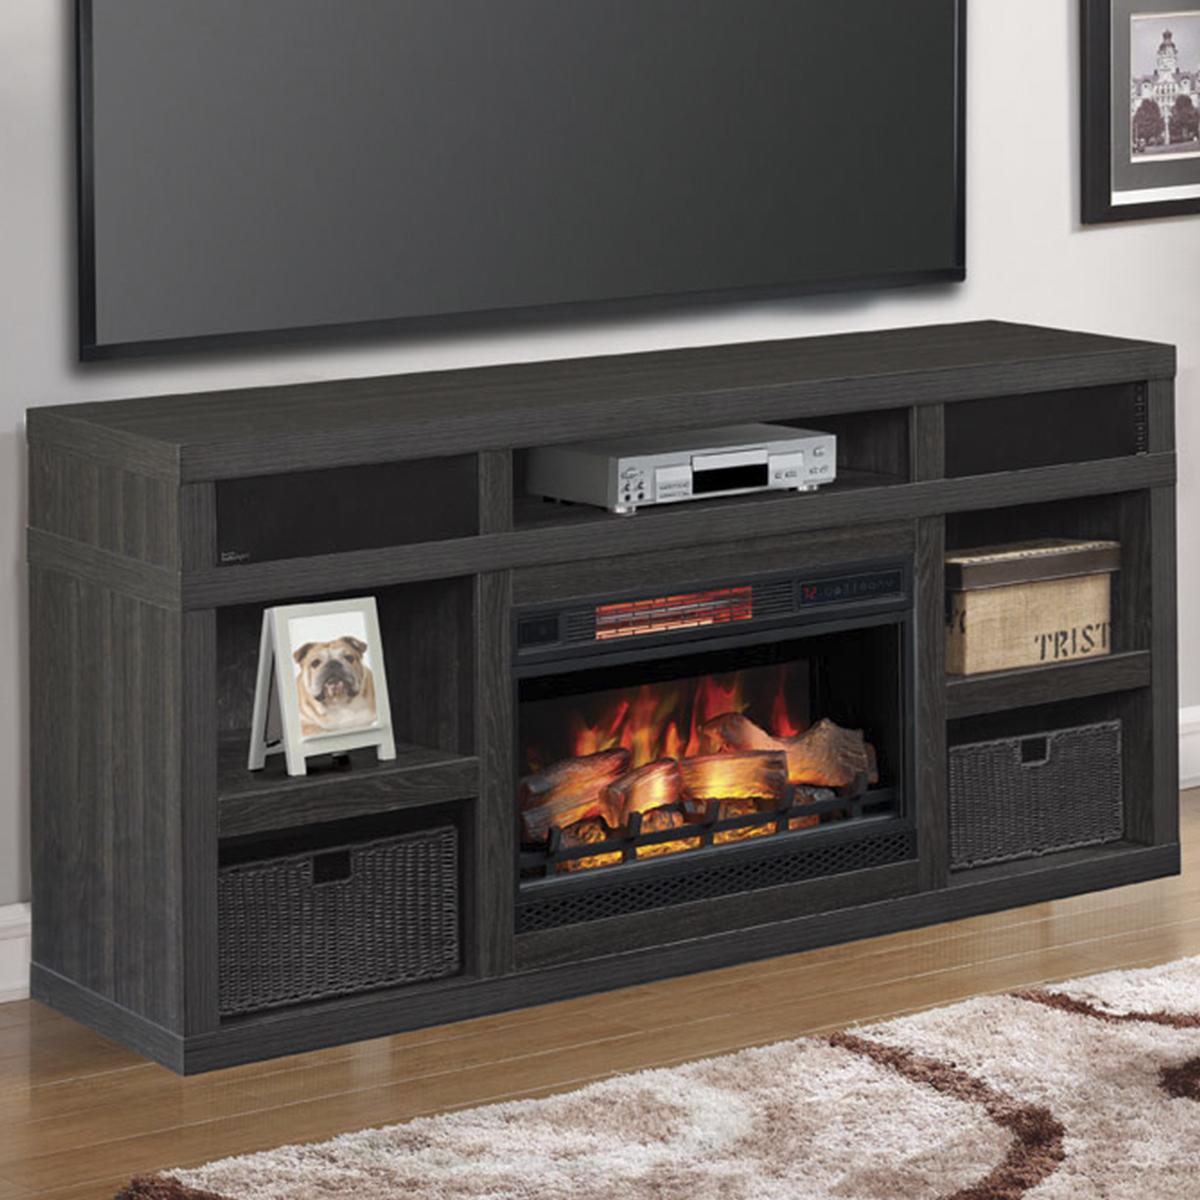 Tv Stand with Fireplace and soundbar Lovely Fabio Flames Greatlin 64" Tv Stand In Black Walnut